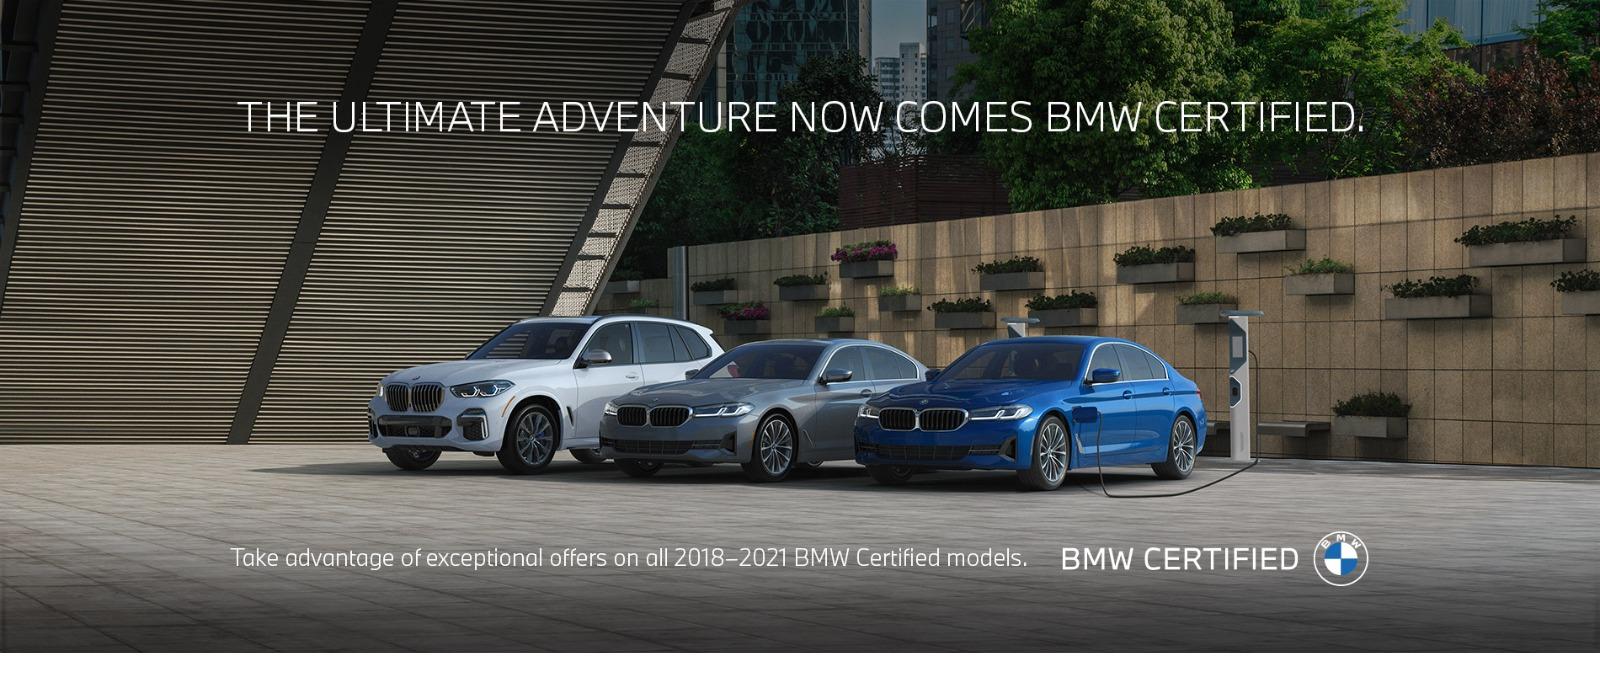 the ultimate Adventure now comes BMW Certified